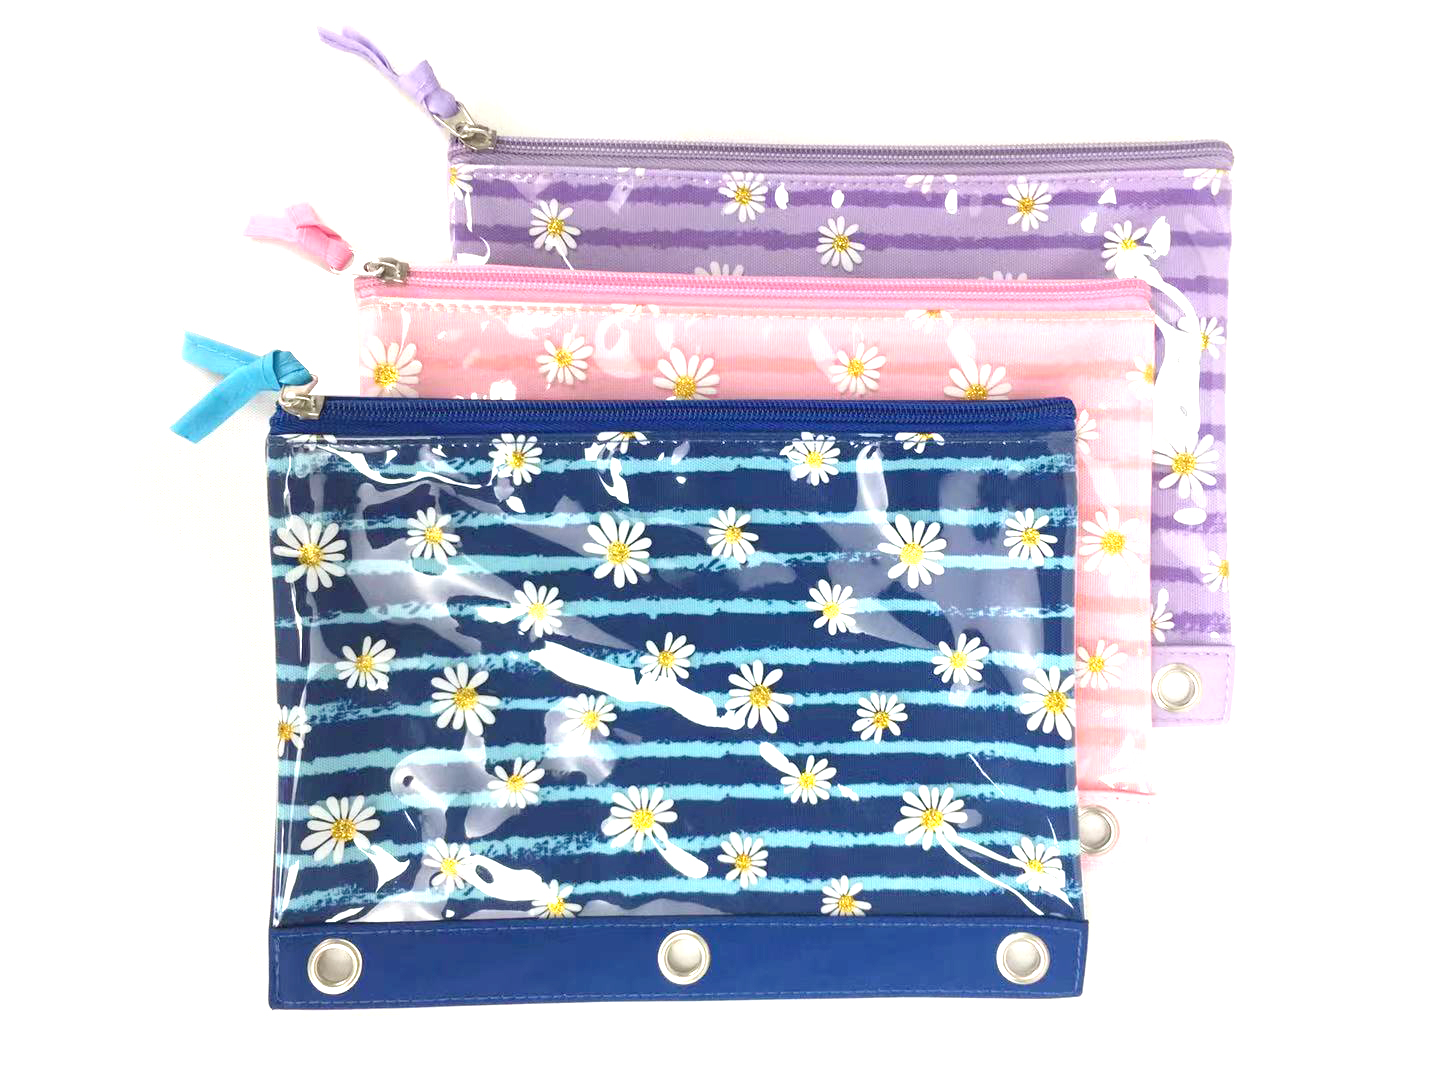 Daisy flower and stripe pattern polyester binder pouch pencil bag with zipper closures with 3-round rings 3 colors available great gift for kids teens adults for school office daily use